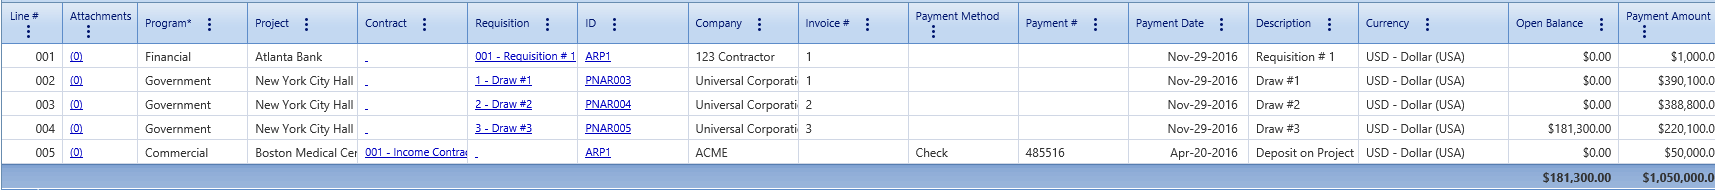 4. A/R and A/P Payment Batches Details Tab Table